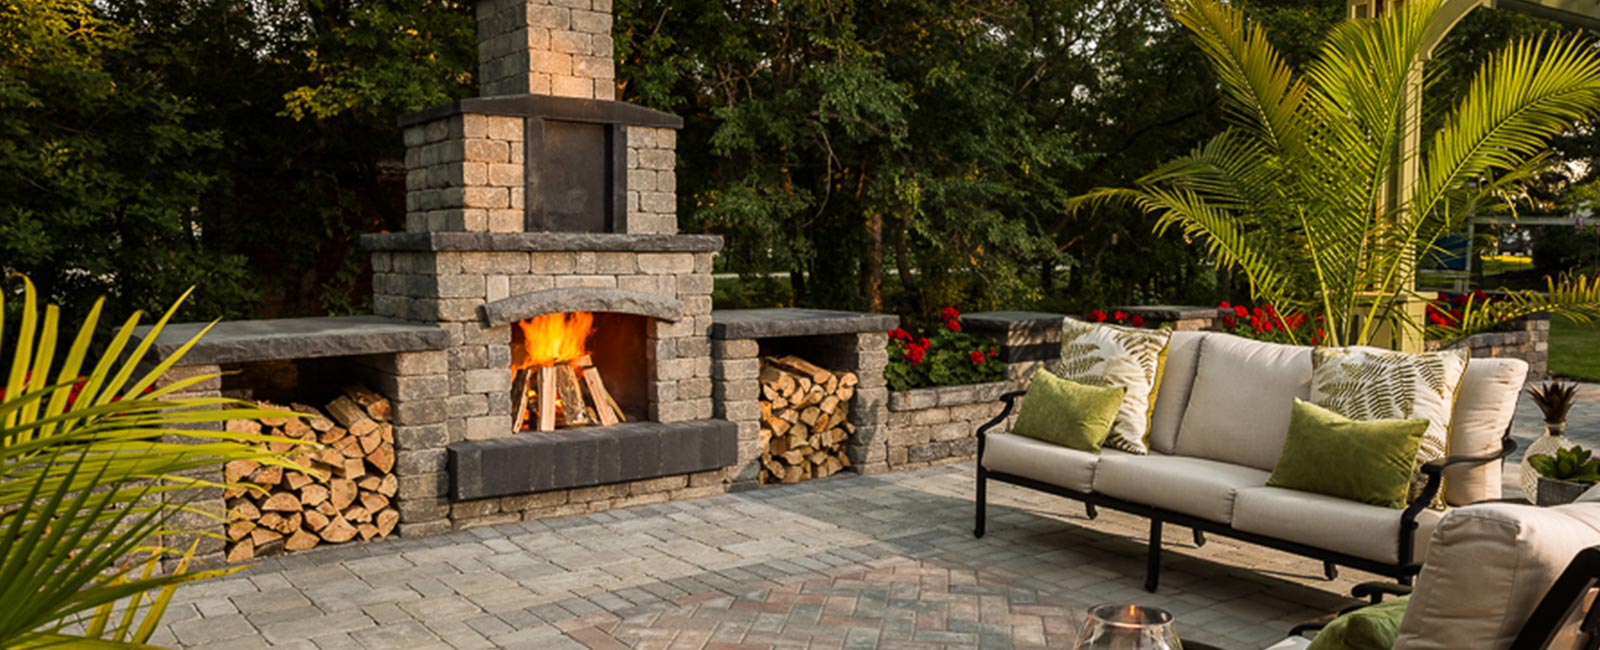 Prelude Landscaping is Winnipeg, Manitoba’s leader in Landscaping production.